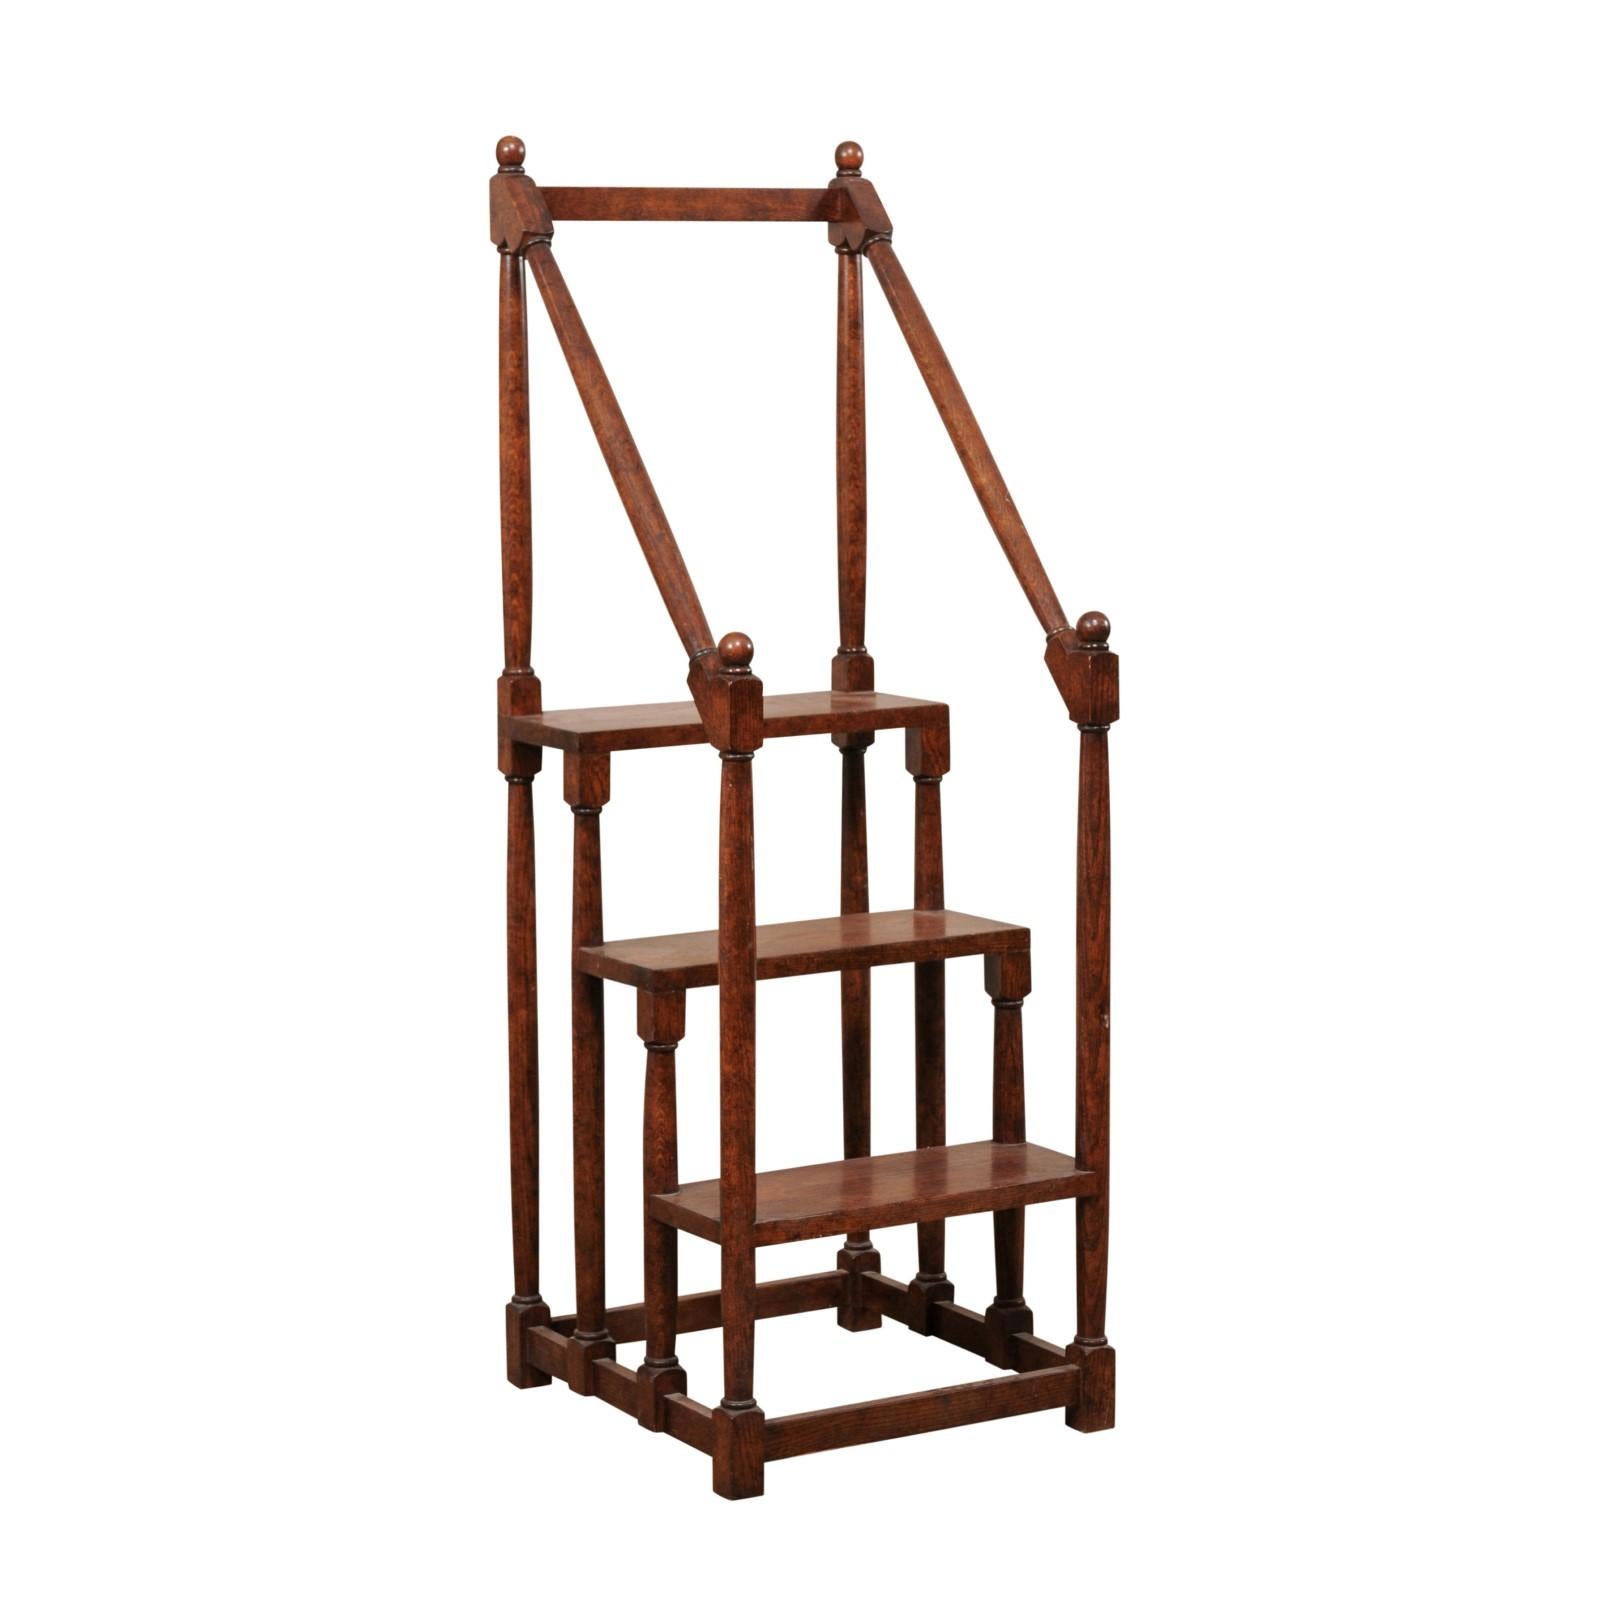 A vintage English carved-wood set of library steps. This oak wood step ladder from England is nicely-sized at just over 70 inches tall, and has three steps. The third, and top step, is approximately 38 inches from the ground- allowing you to get